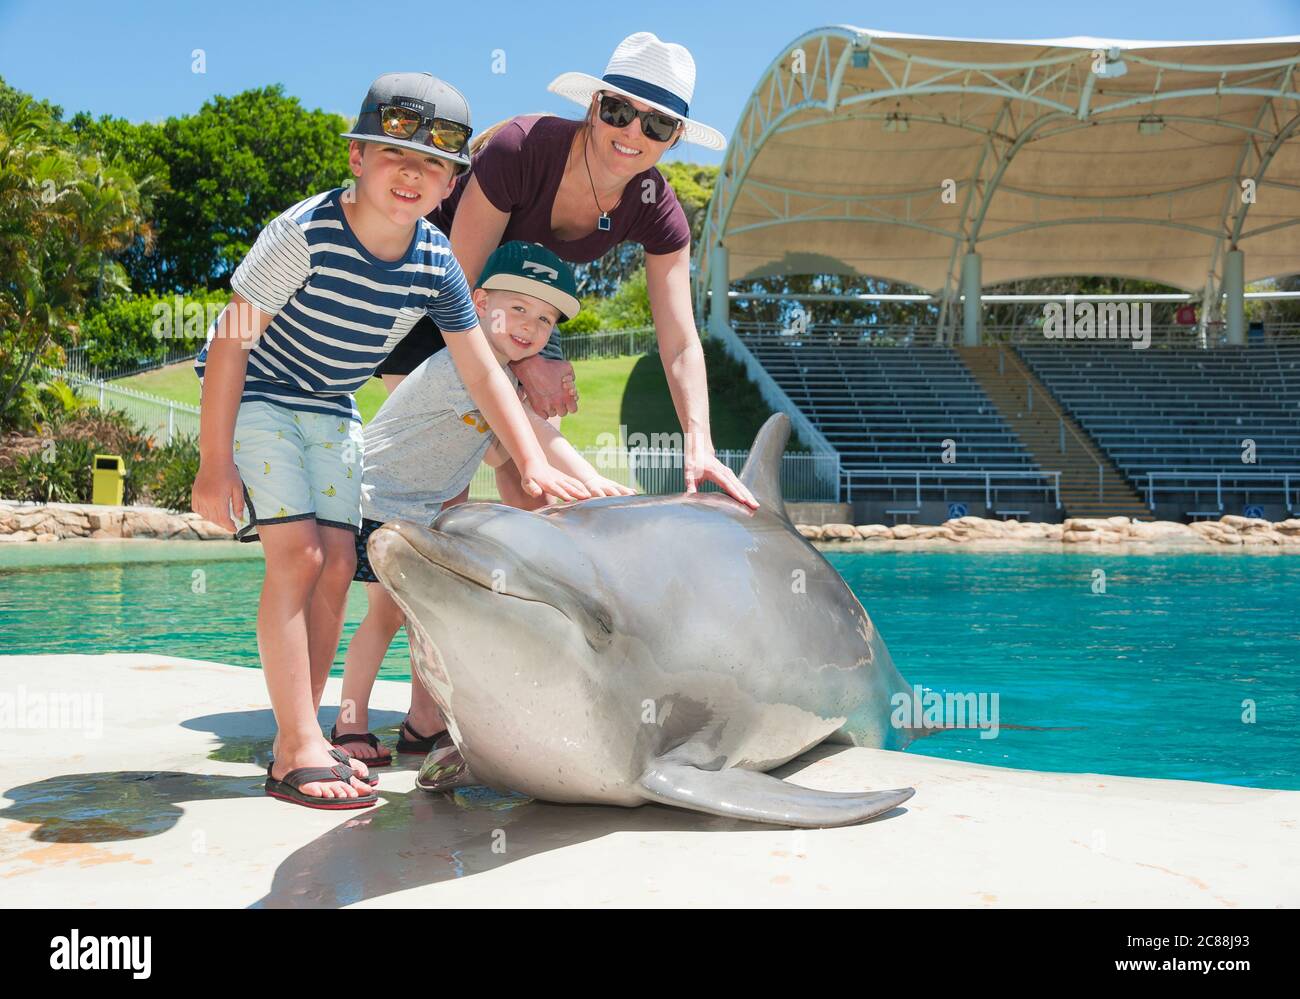 Dolphin being patted by a tourist family at the dolphin display pool at Sea World on the Gold Coast, Queensland Australia. Stock Photo